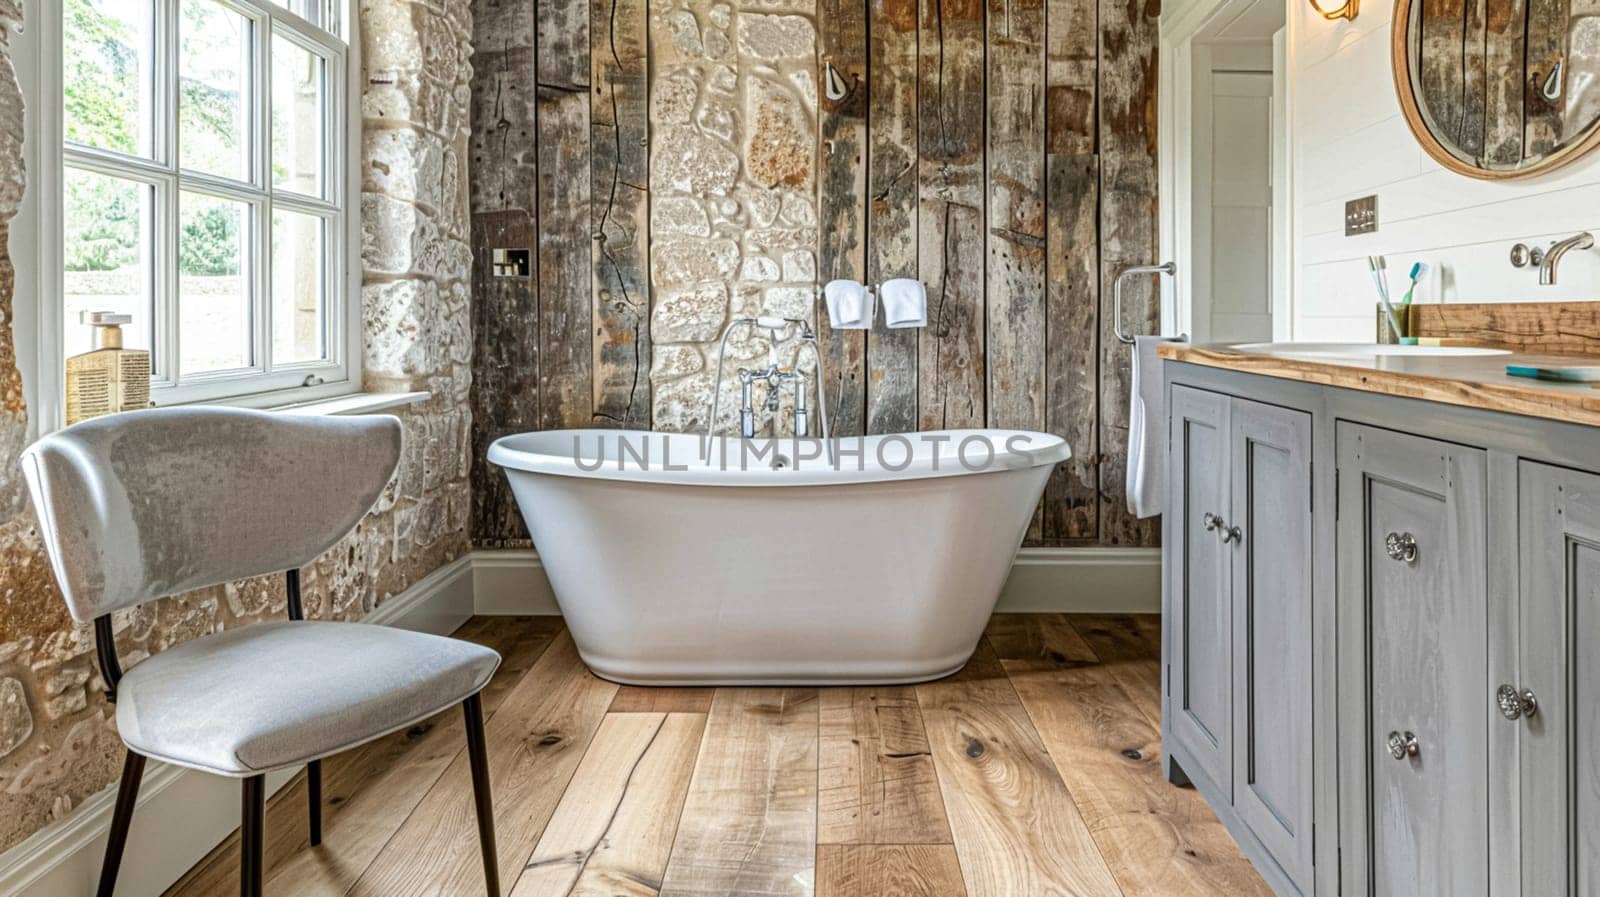 Cotswolds cottage style bathroom decor, interior design and home decor, bathtub and bathroom furniture, English countryside house by Anneleven